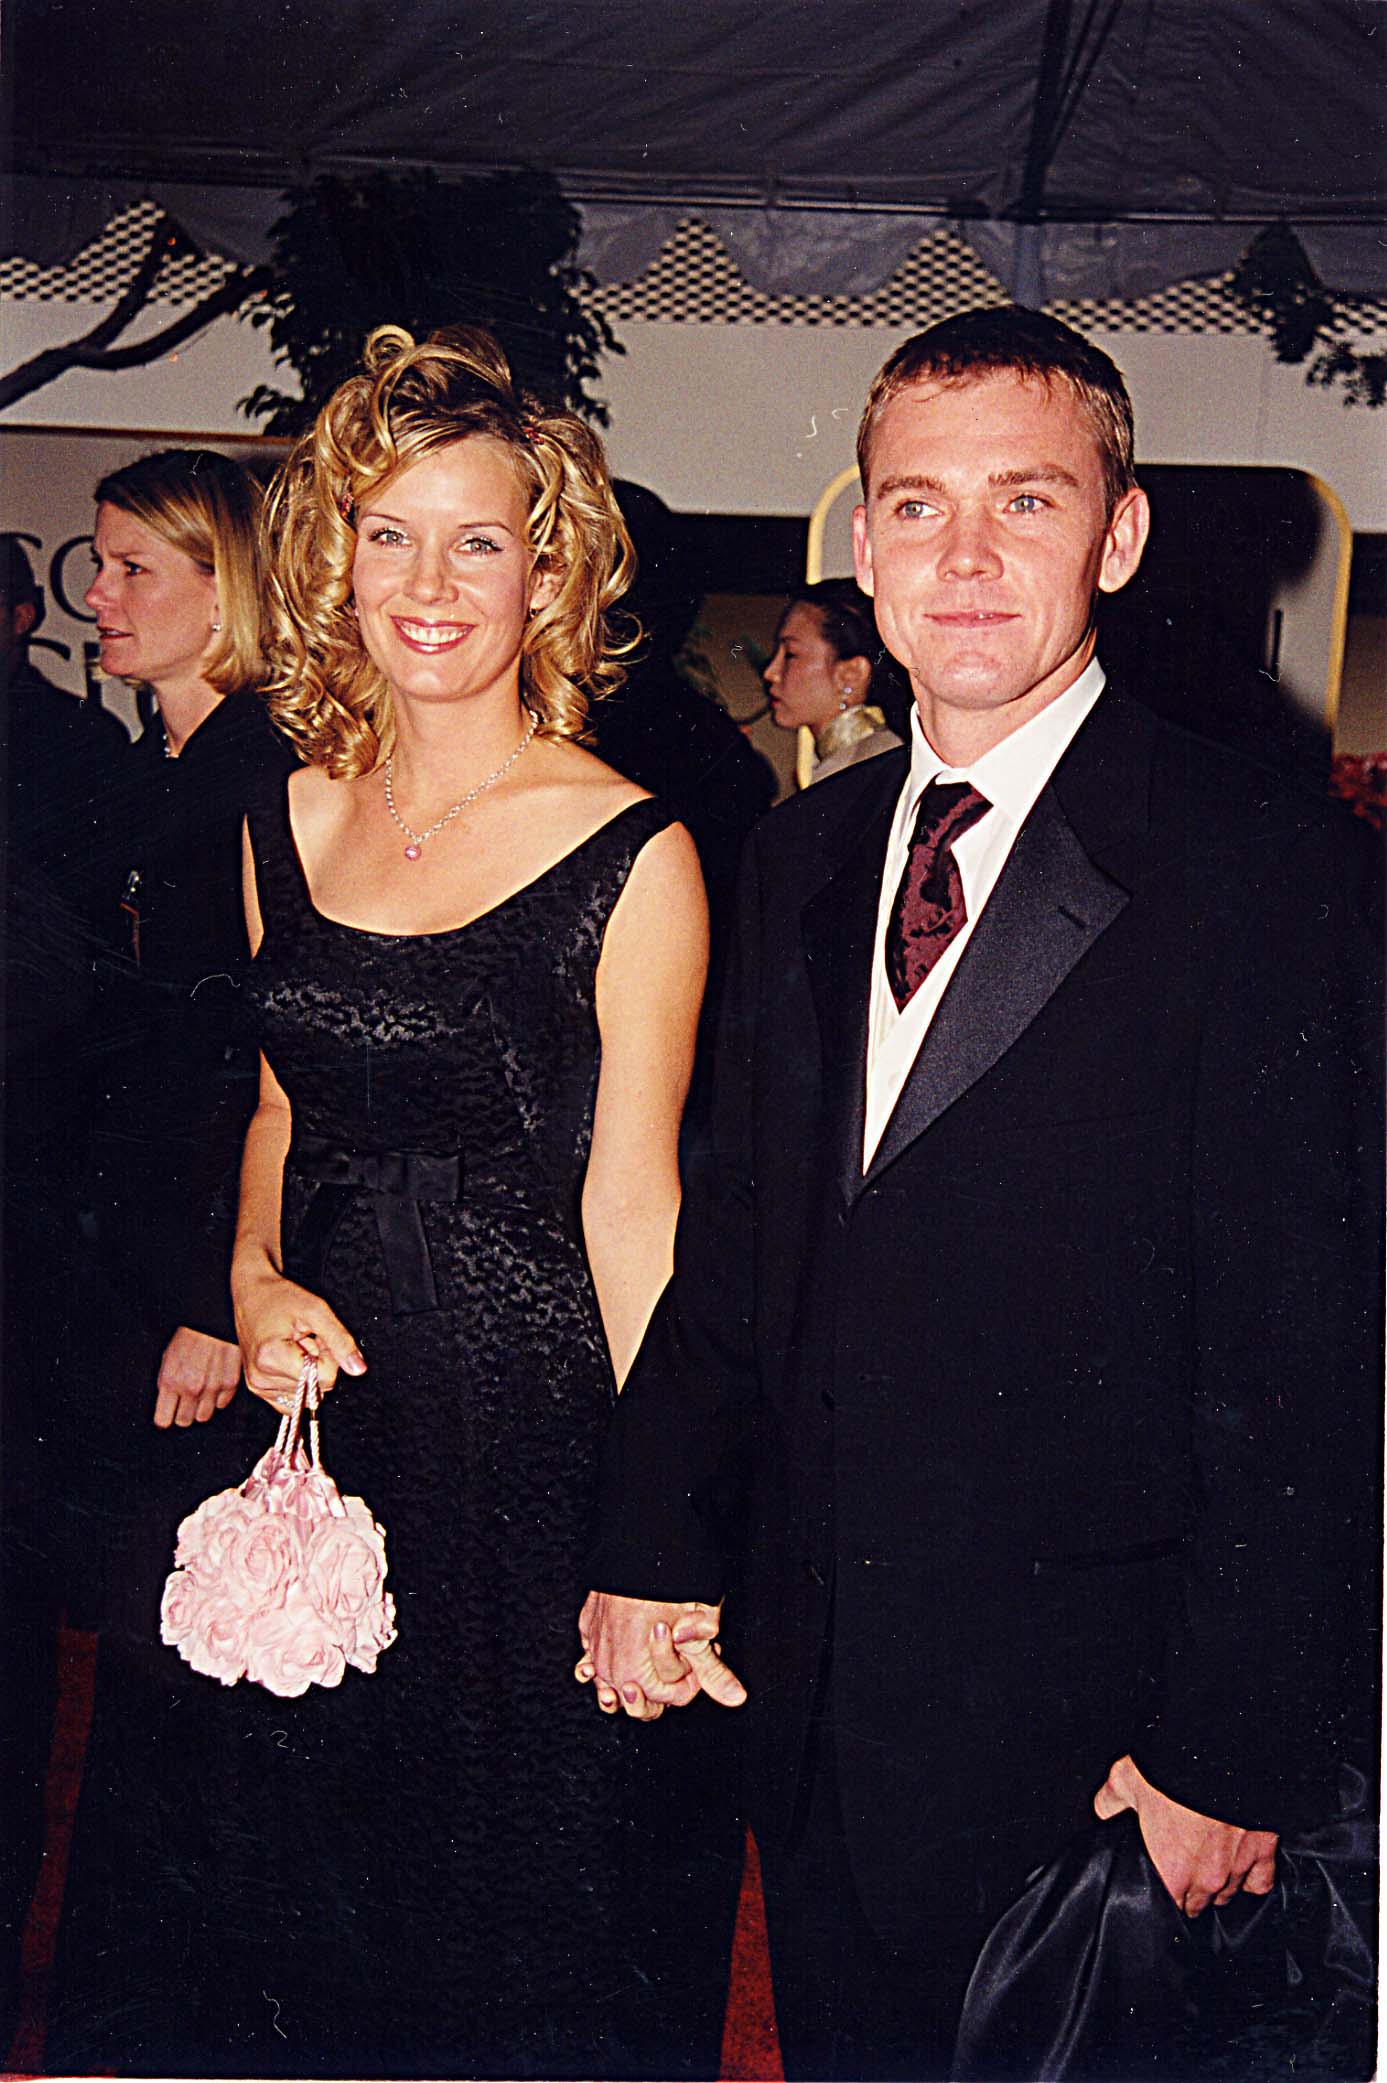 Andrea Schroder and Ricky Schroder attend the Golden Globe Awards in Los Angeles, California in 1999 | Source: Getty Images